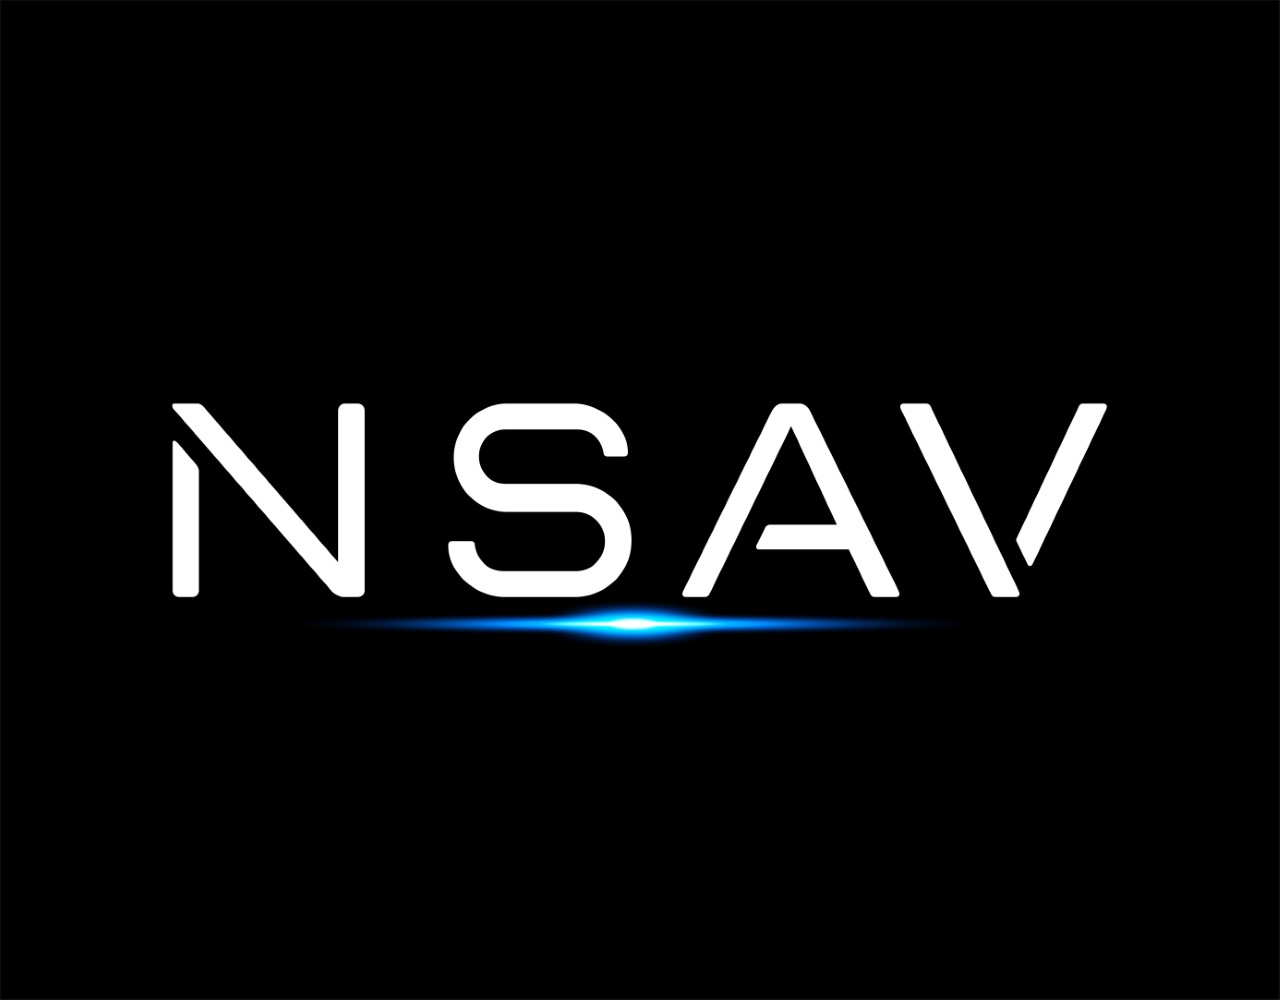 NSAV ANNOUNCES SIGNING OF LETTER OF INTENT TO ACQUIRE MAJORITY STAKE IN LEADING CRYPTOCURRENCY EXCHANGE